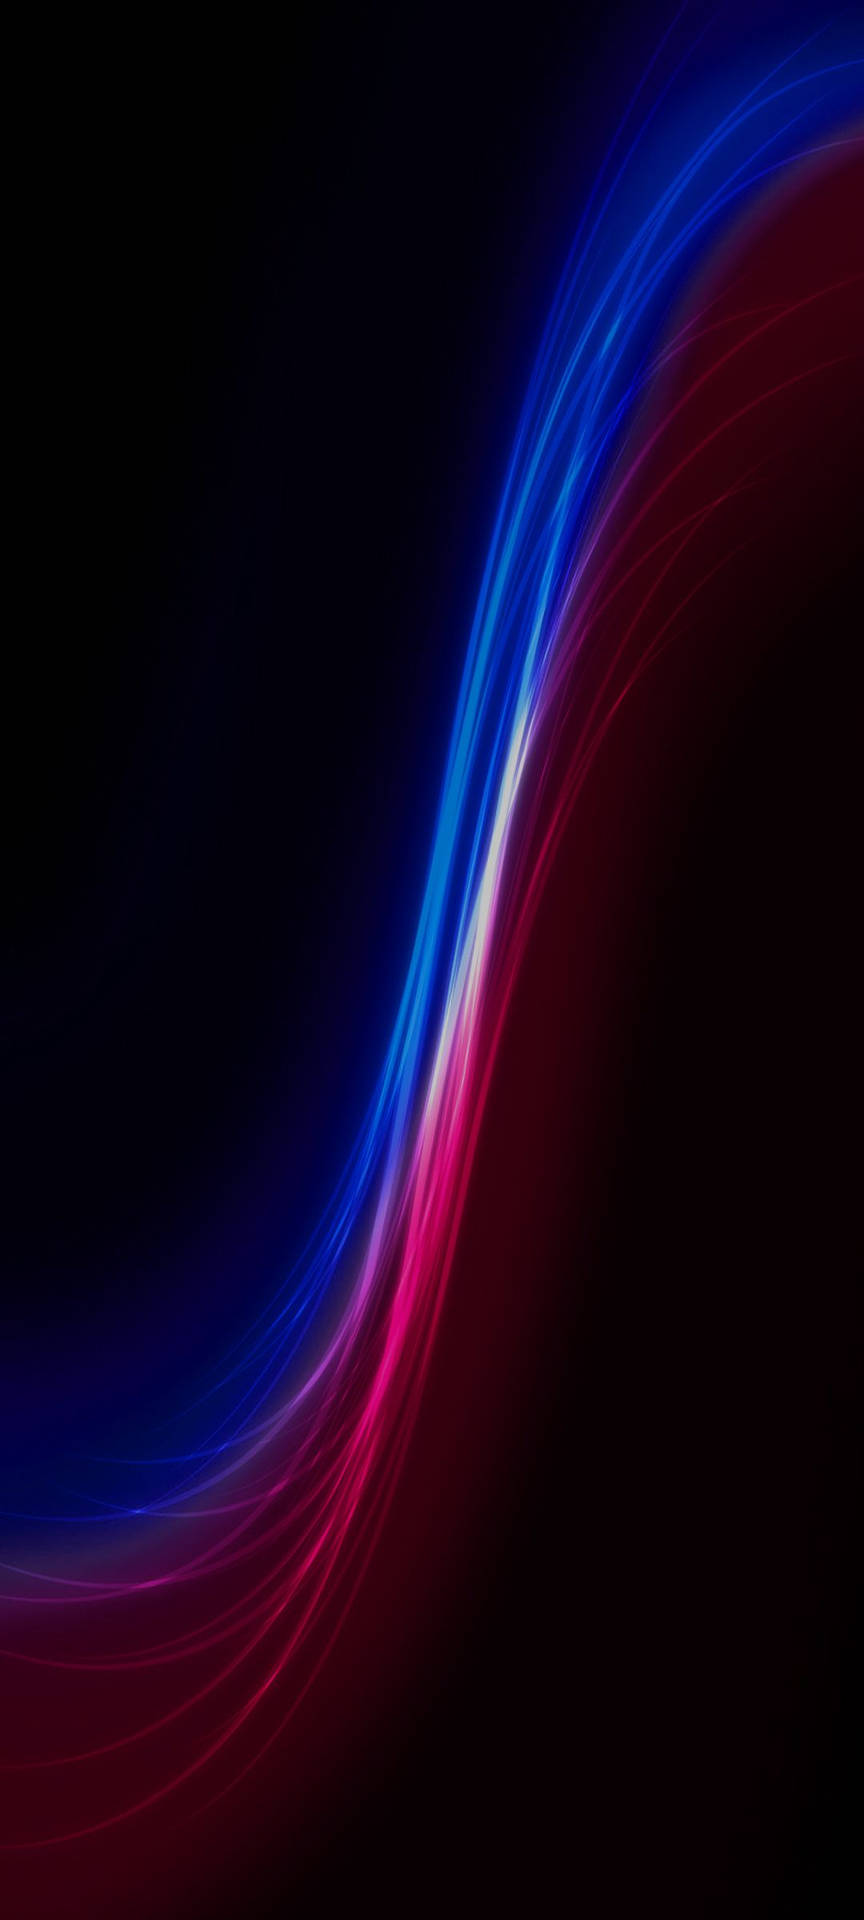 Samsung A51 Blue And Pink Neon Waves Wallpaper